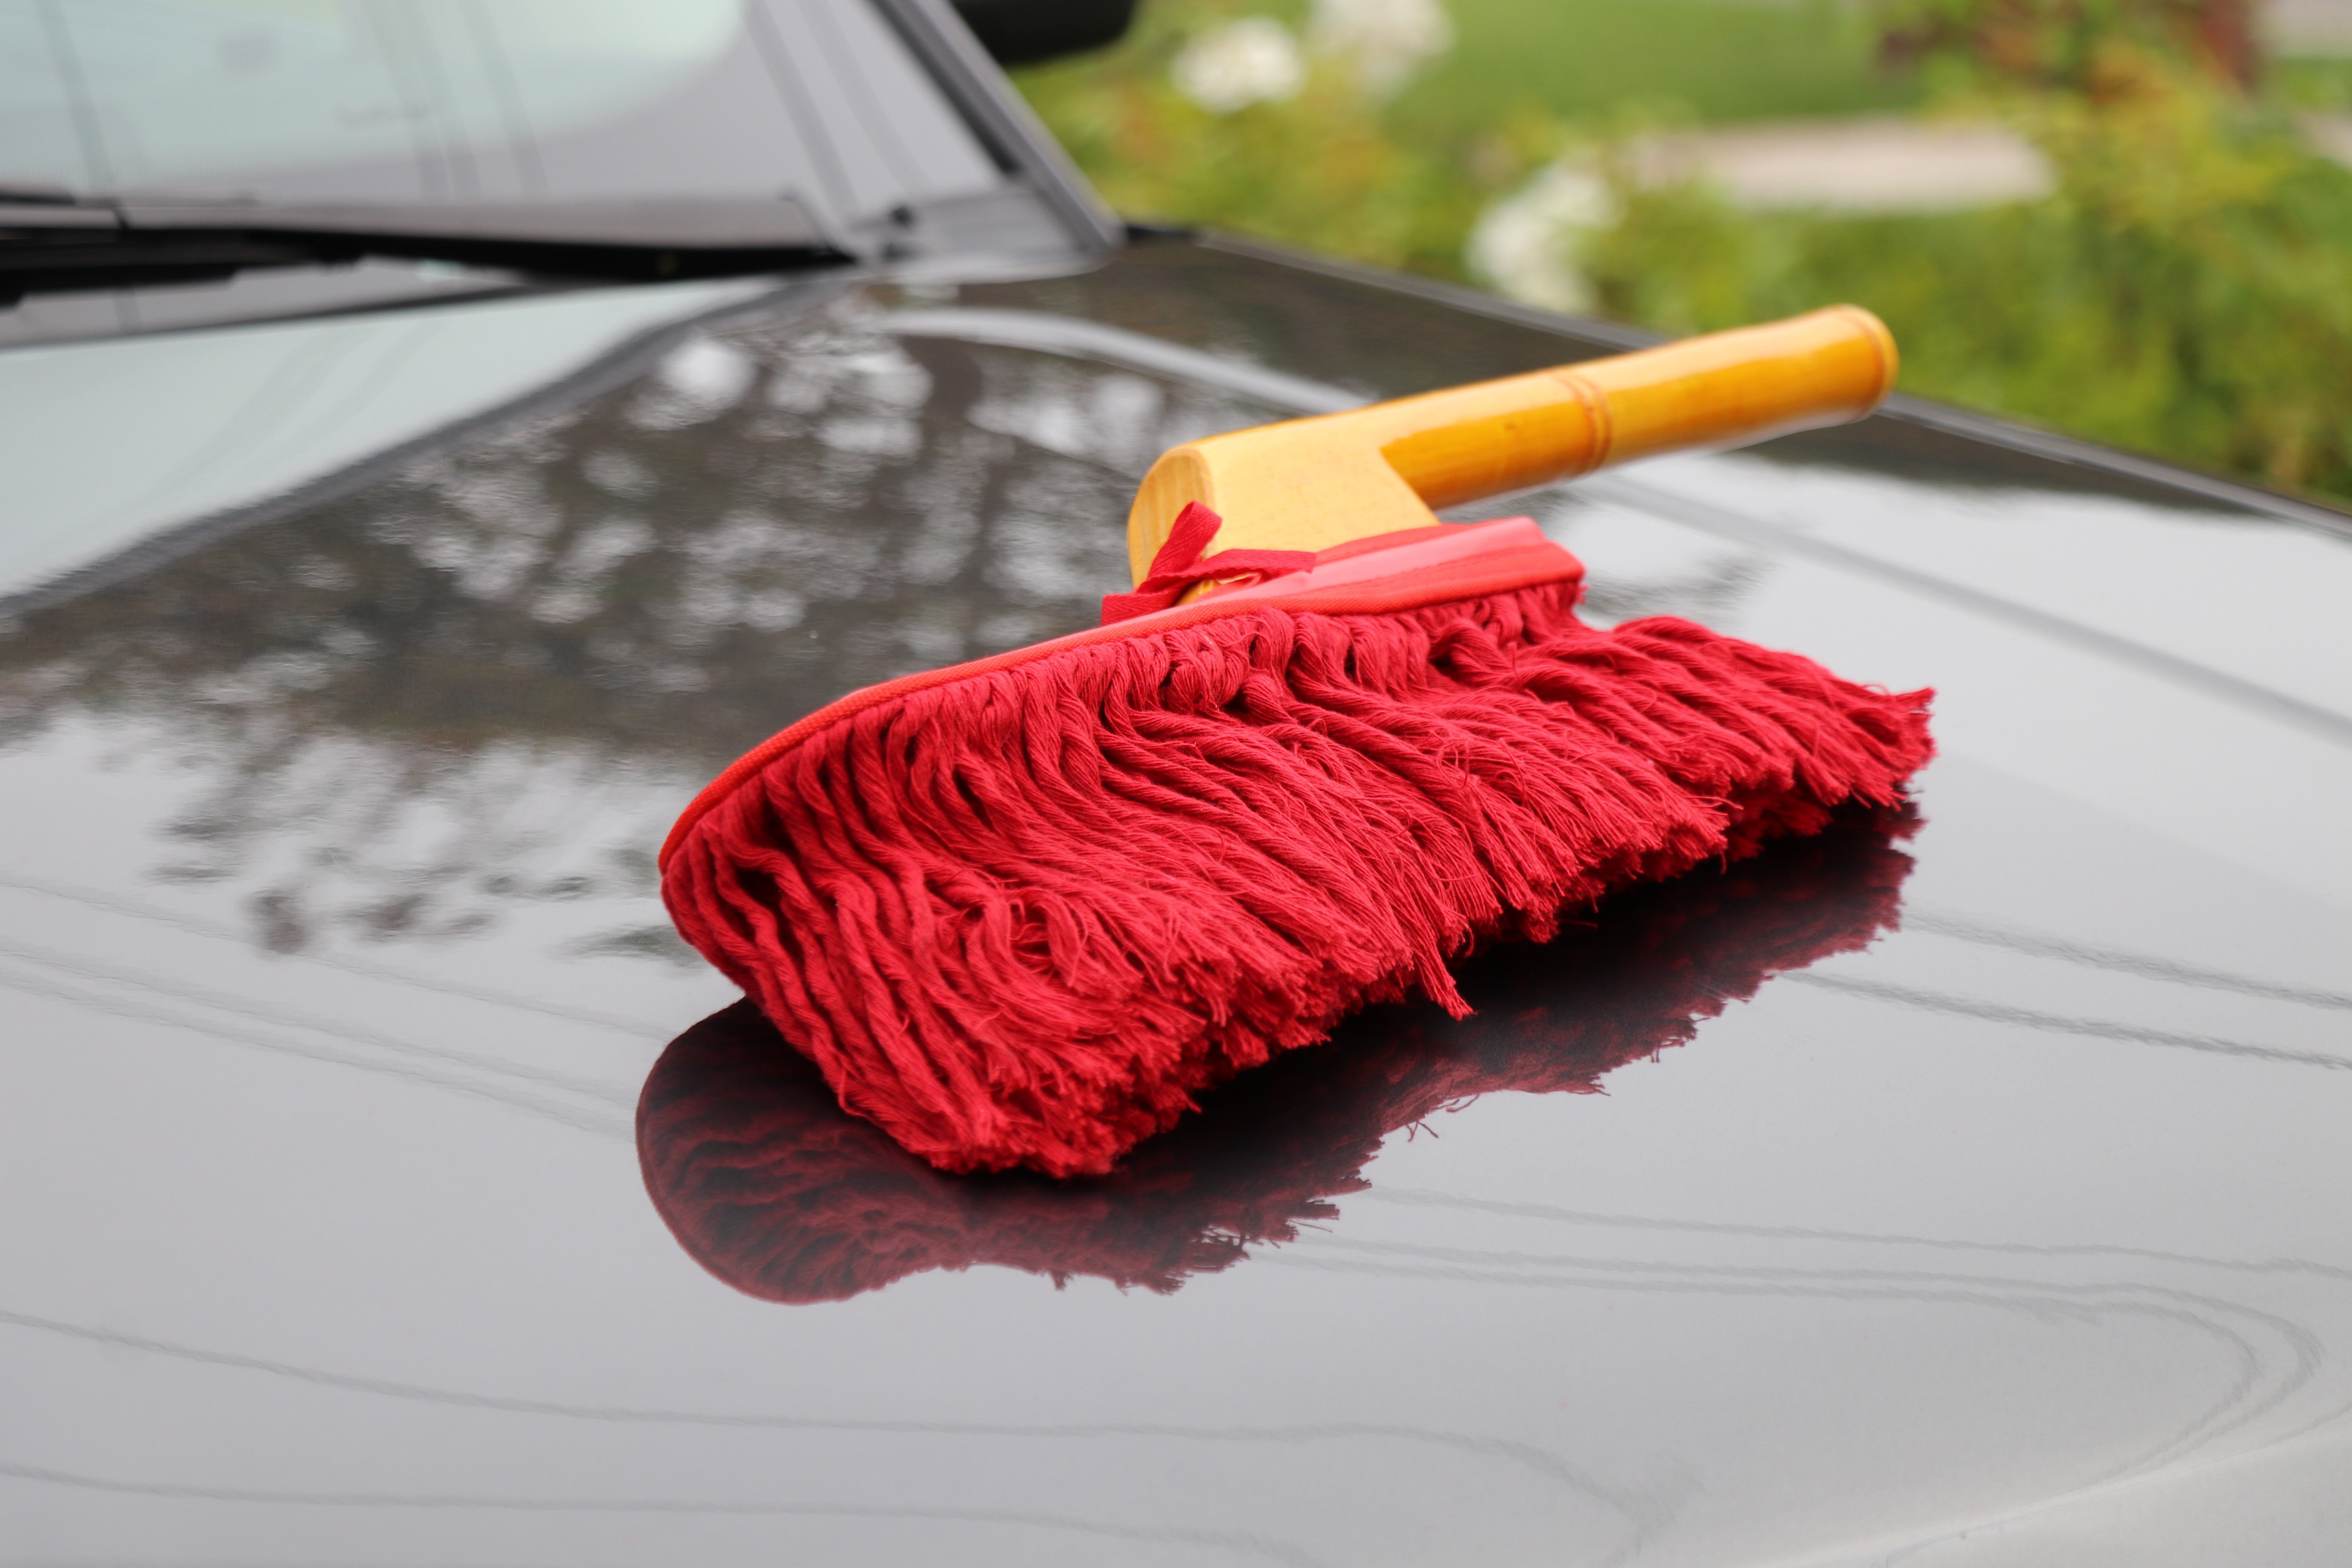 California Car Duster Plastic Handle Car Duster with Cotton Mop 86243